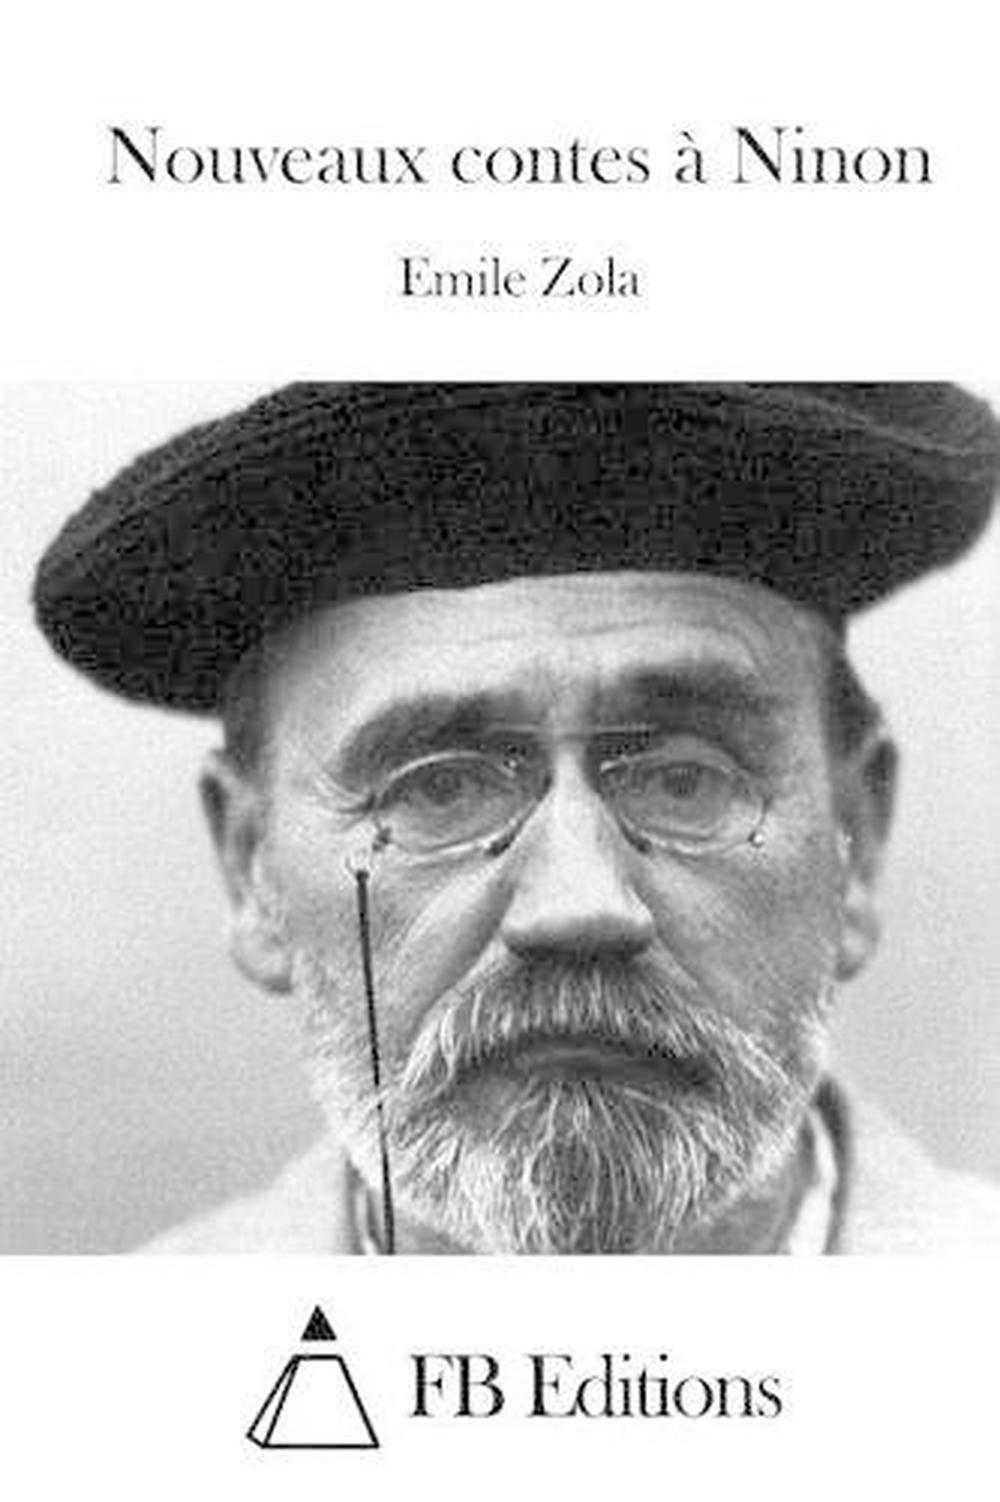 Nouveaux Contes a Ninon by Emile Zola (French) Paperback Book Free ...